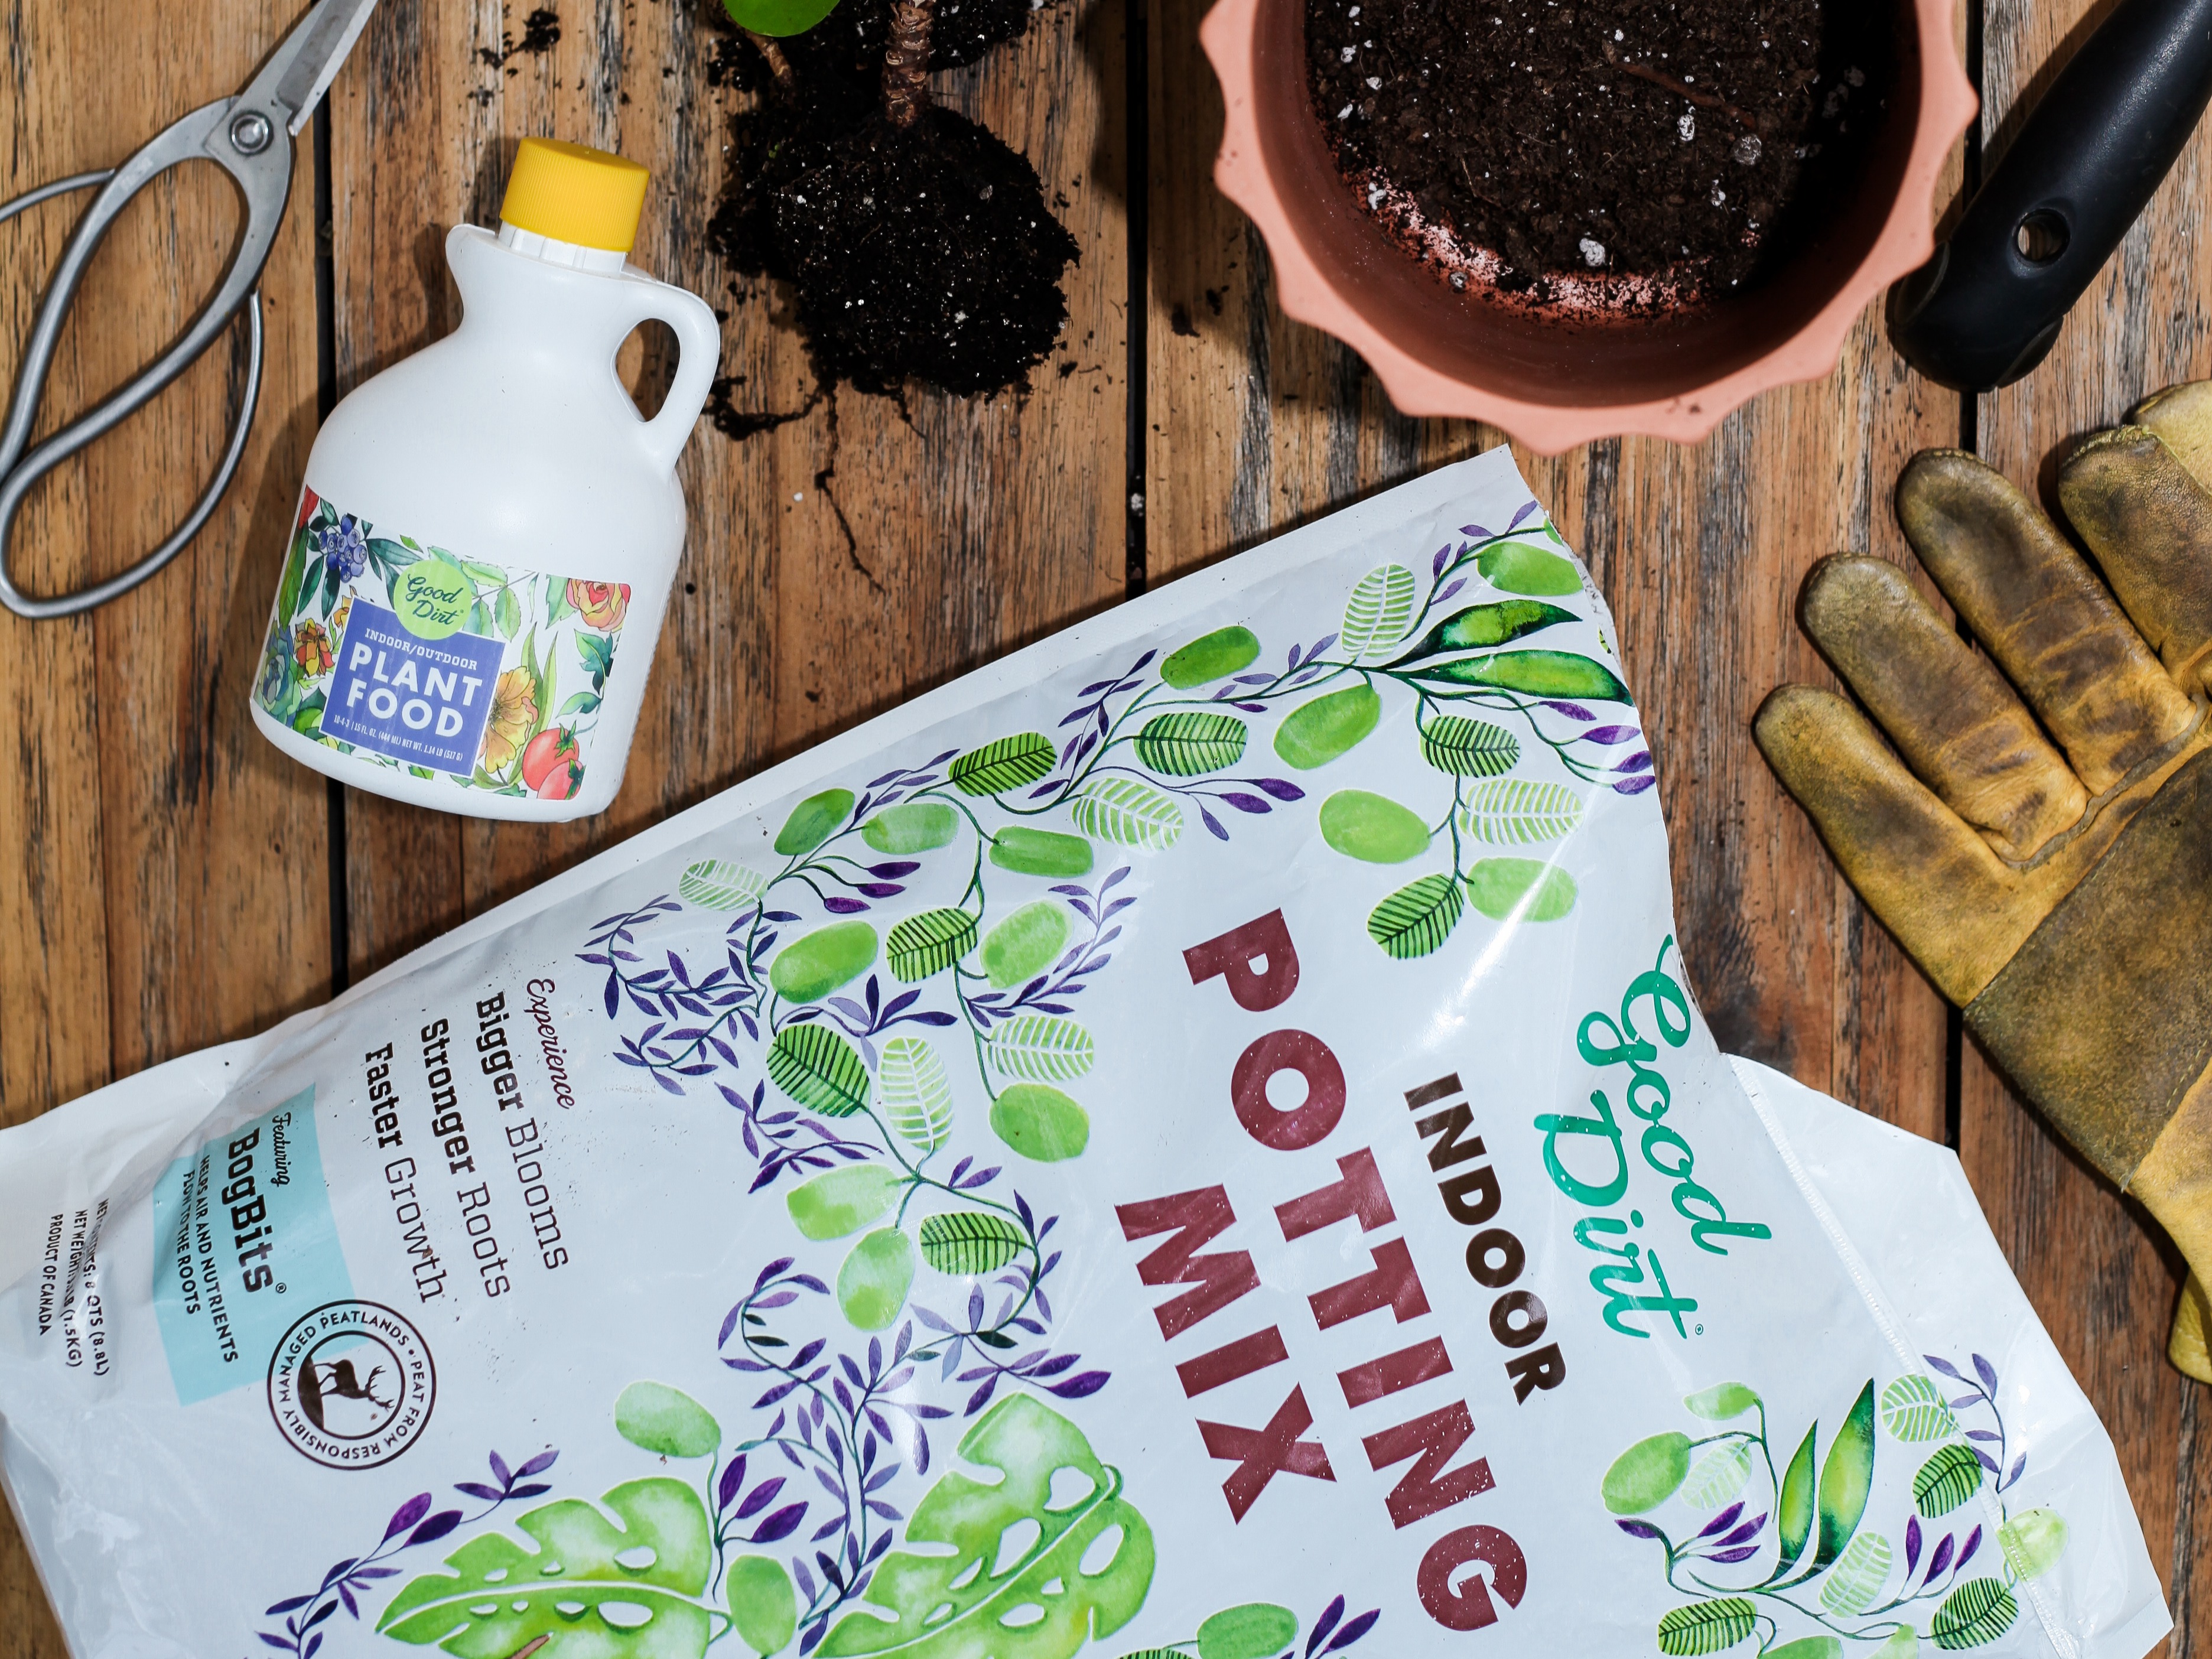 Good Dirt Indoor Potting Mix bag and Good Dirt Plant food on wood deck with gardening gloves and pots